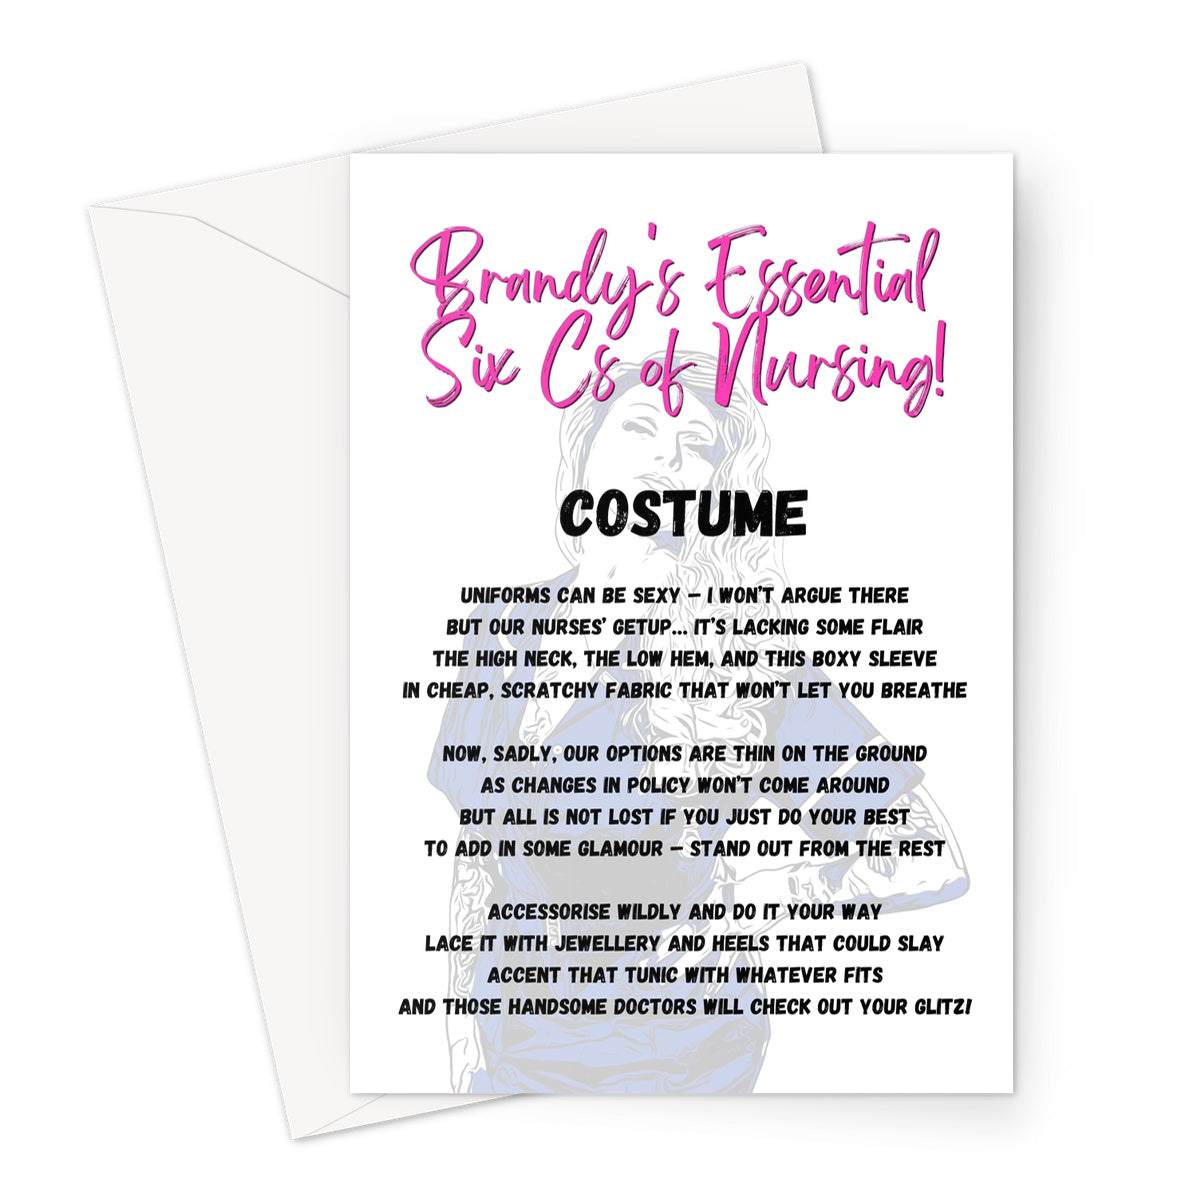 Blank greeting card with a verse from Brandy Bex's Essential Six Cs of Nursing on the front in black.